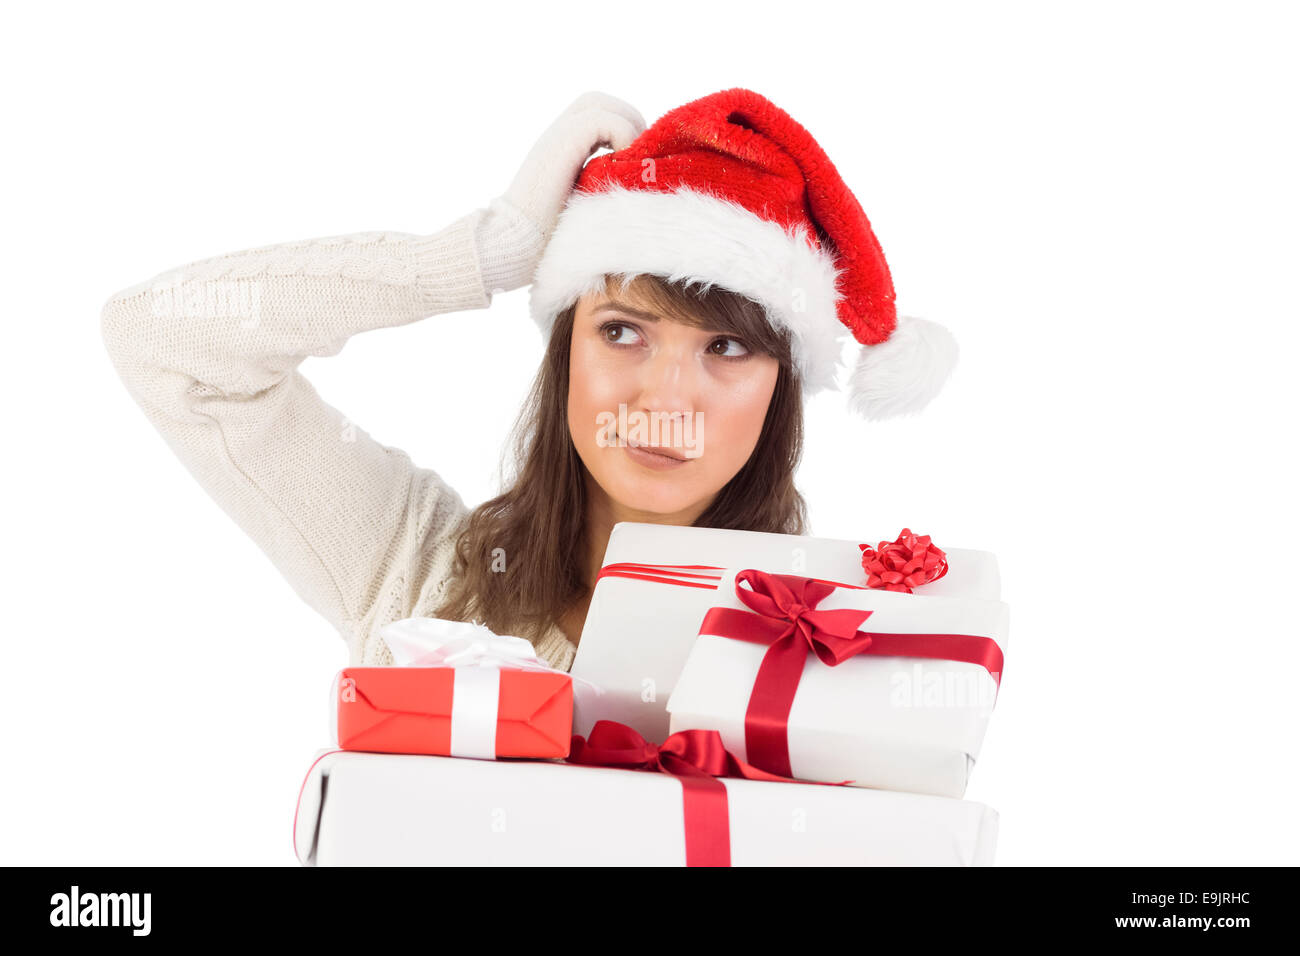 Santa woman scratching head and holding gifts Stock Photo